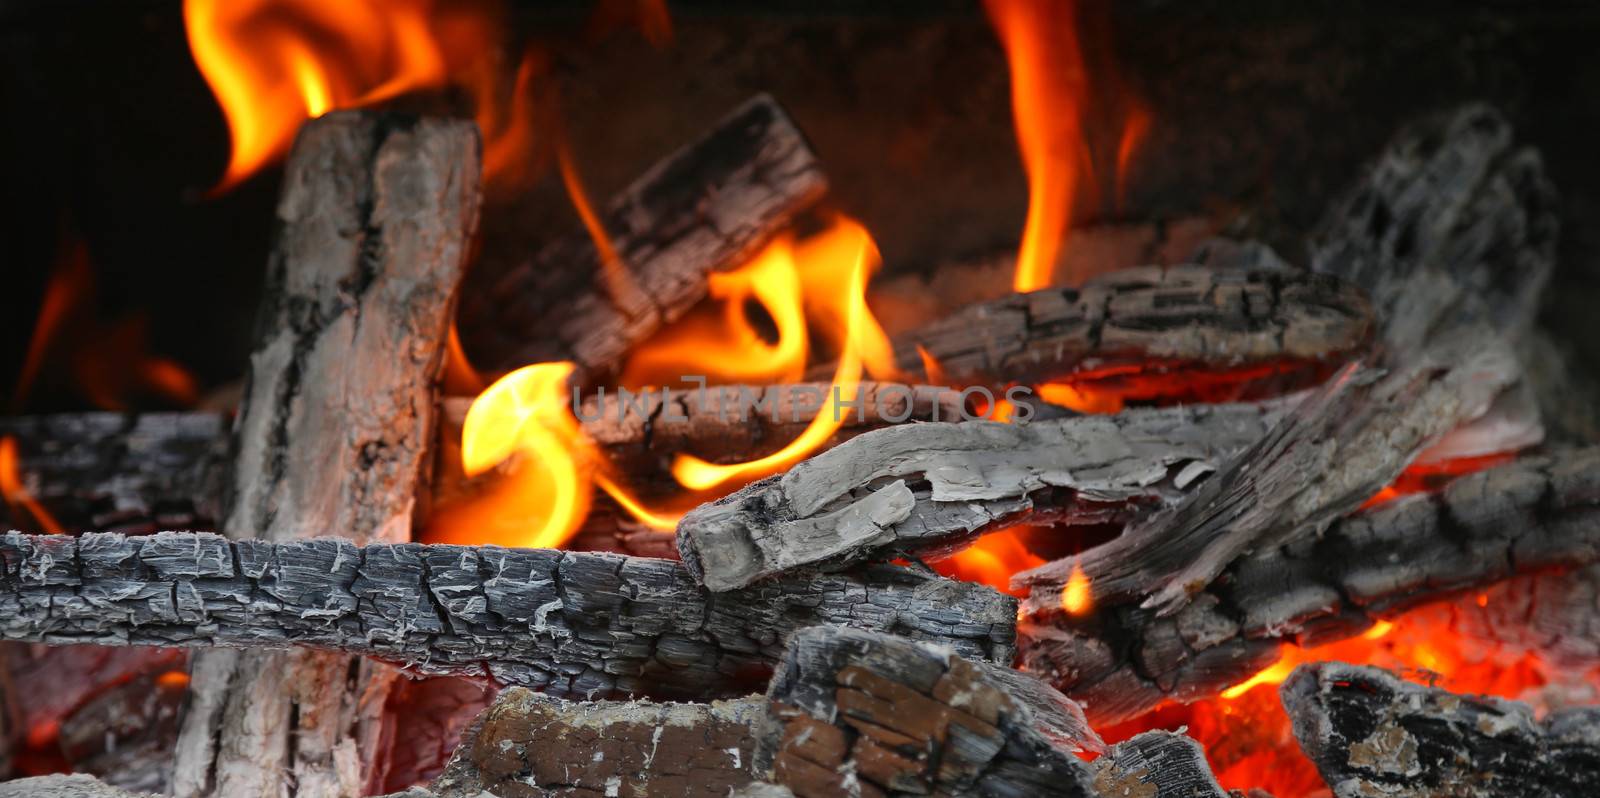 fireplace with coals burning down by indigolotos